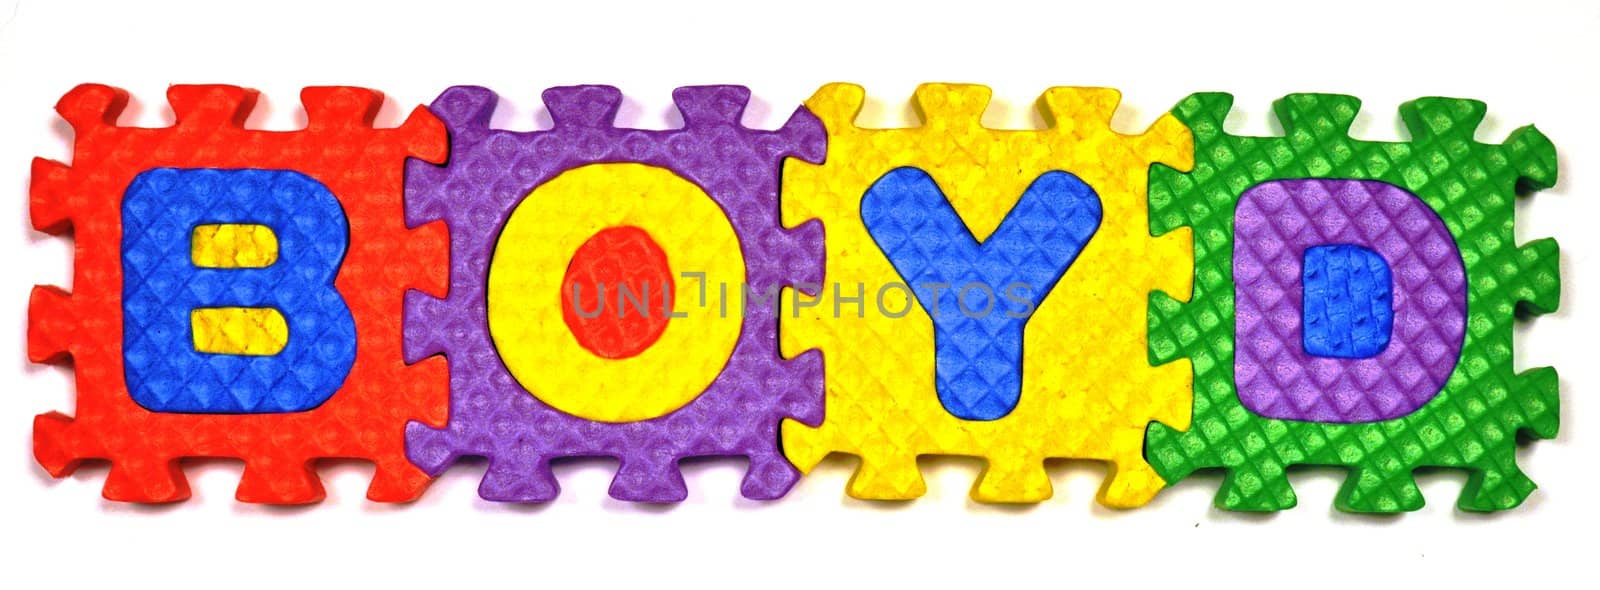 Connected Letters - BOYD in center by RefocusPhoto